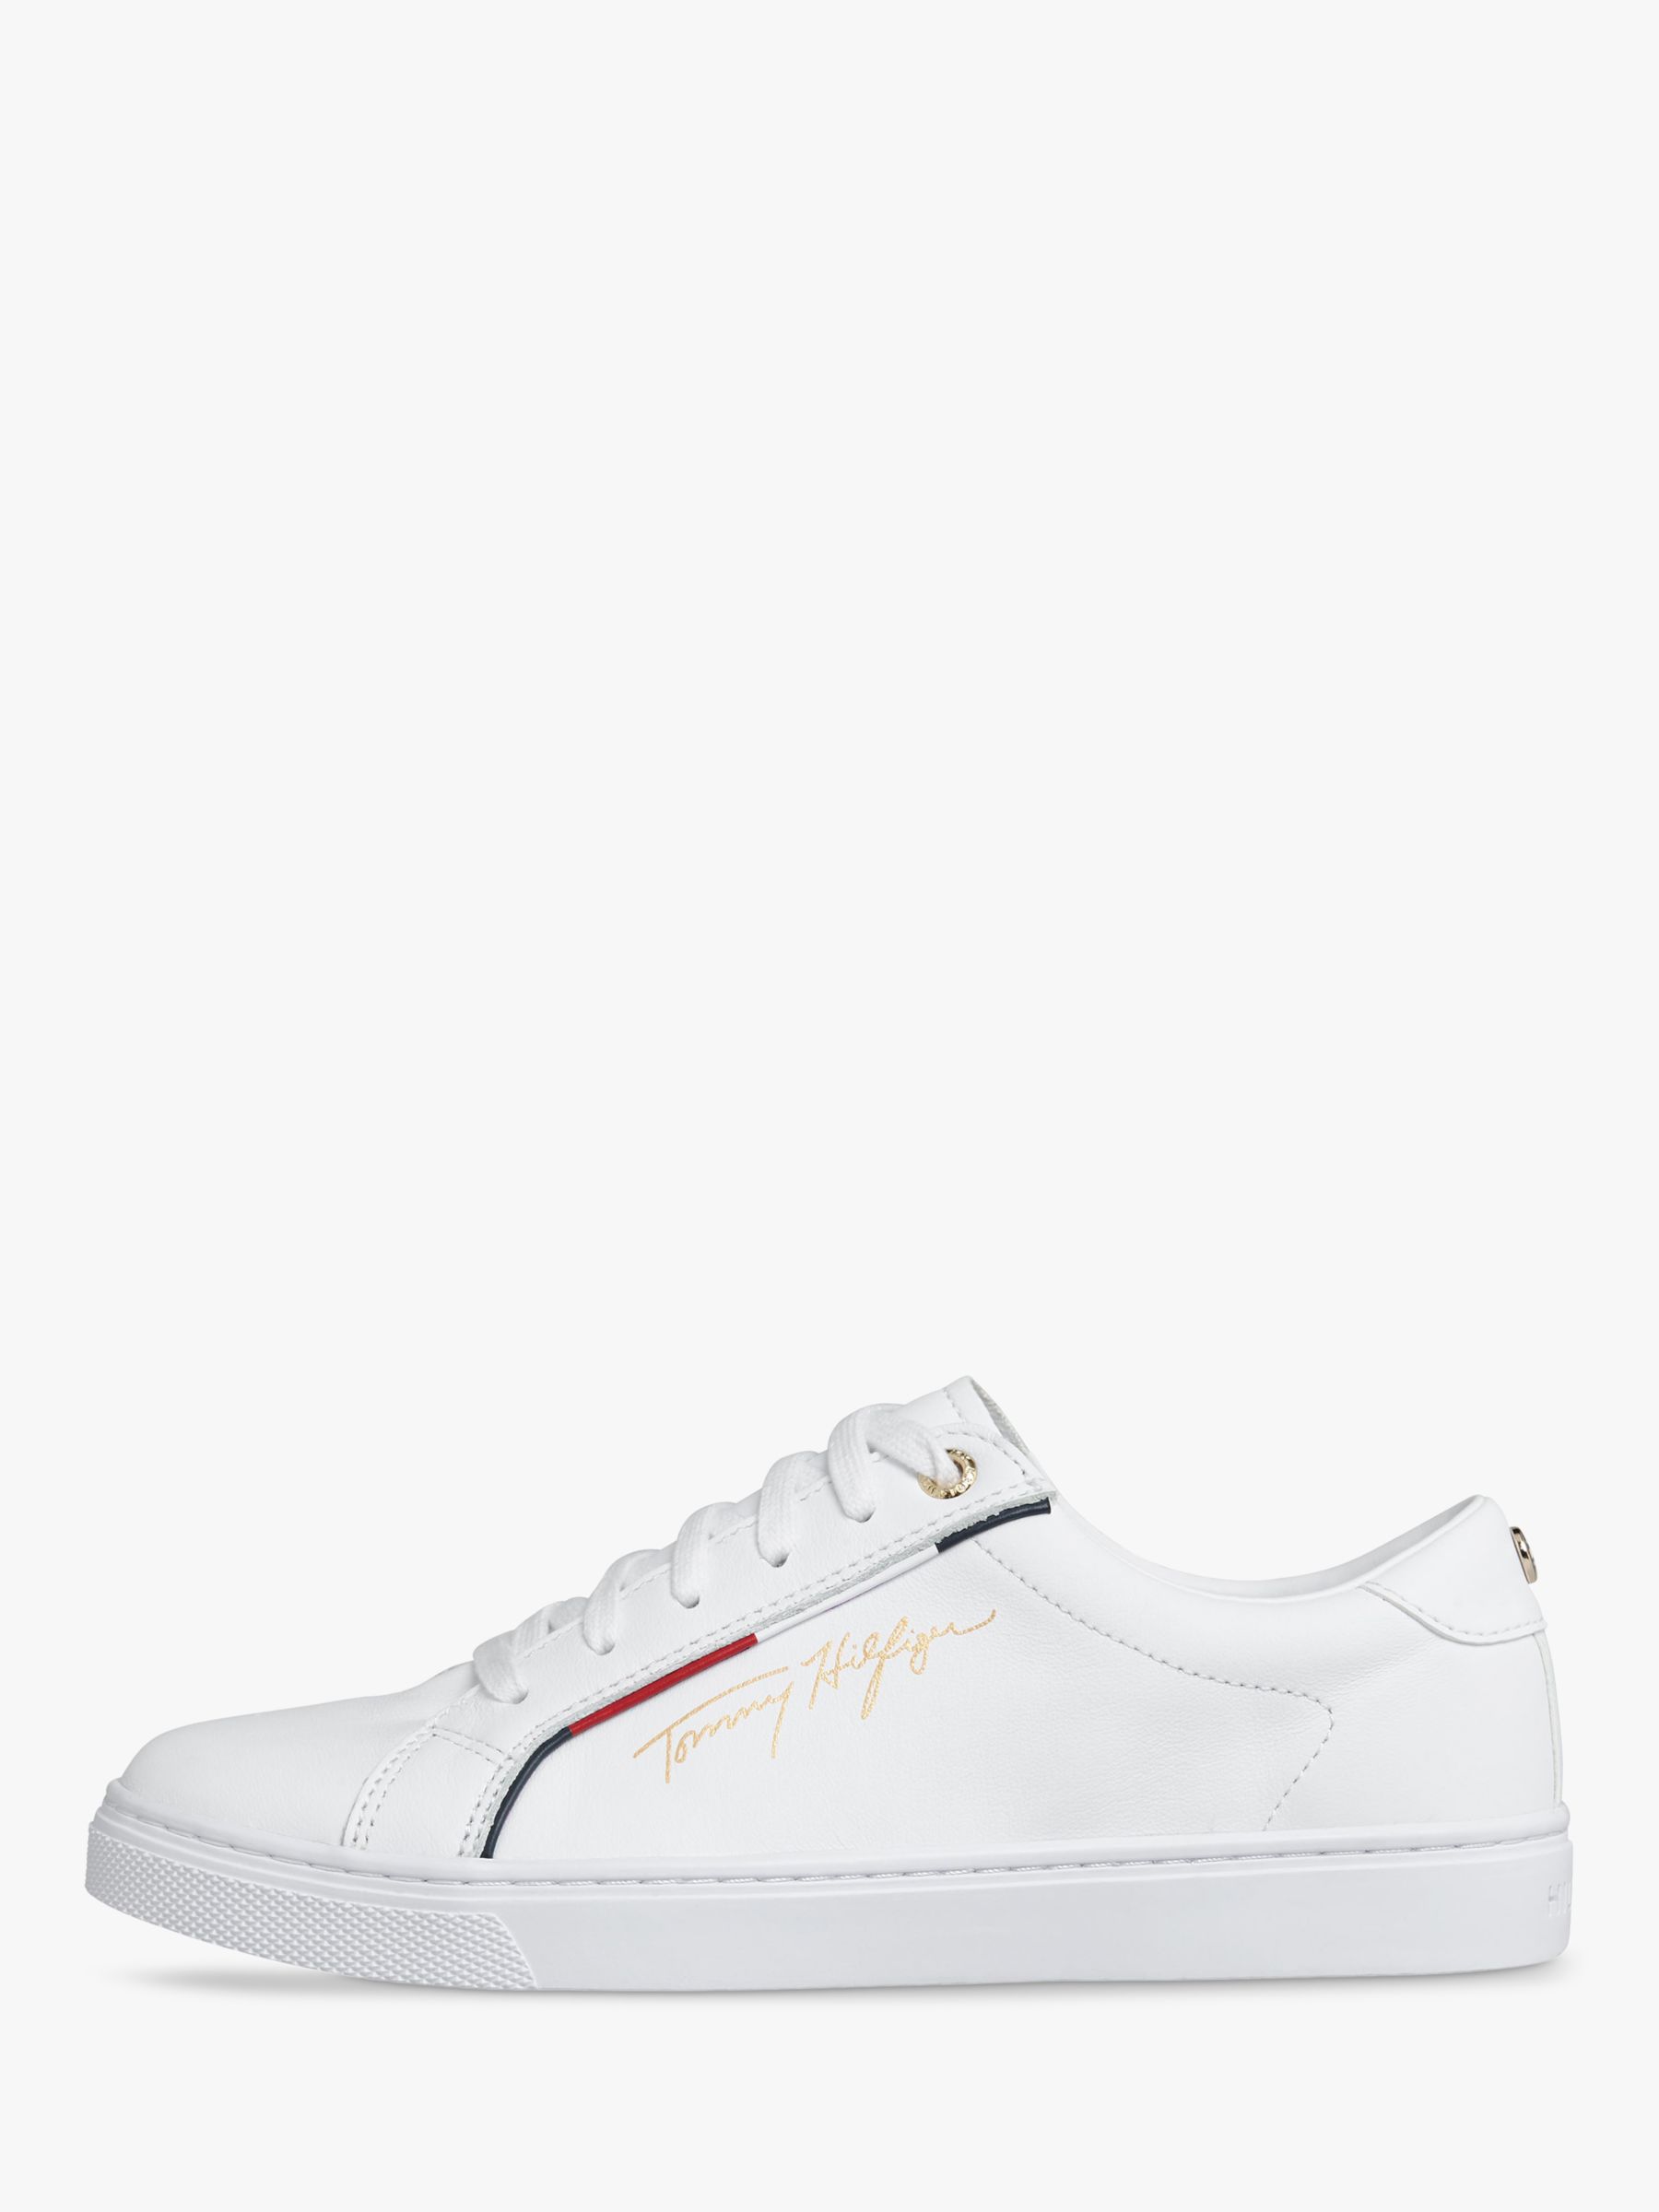 Tommy Hilfiger Signature Leather Trainers, White at John Lewis & Partners